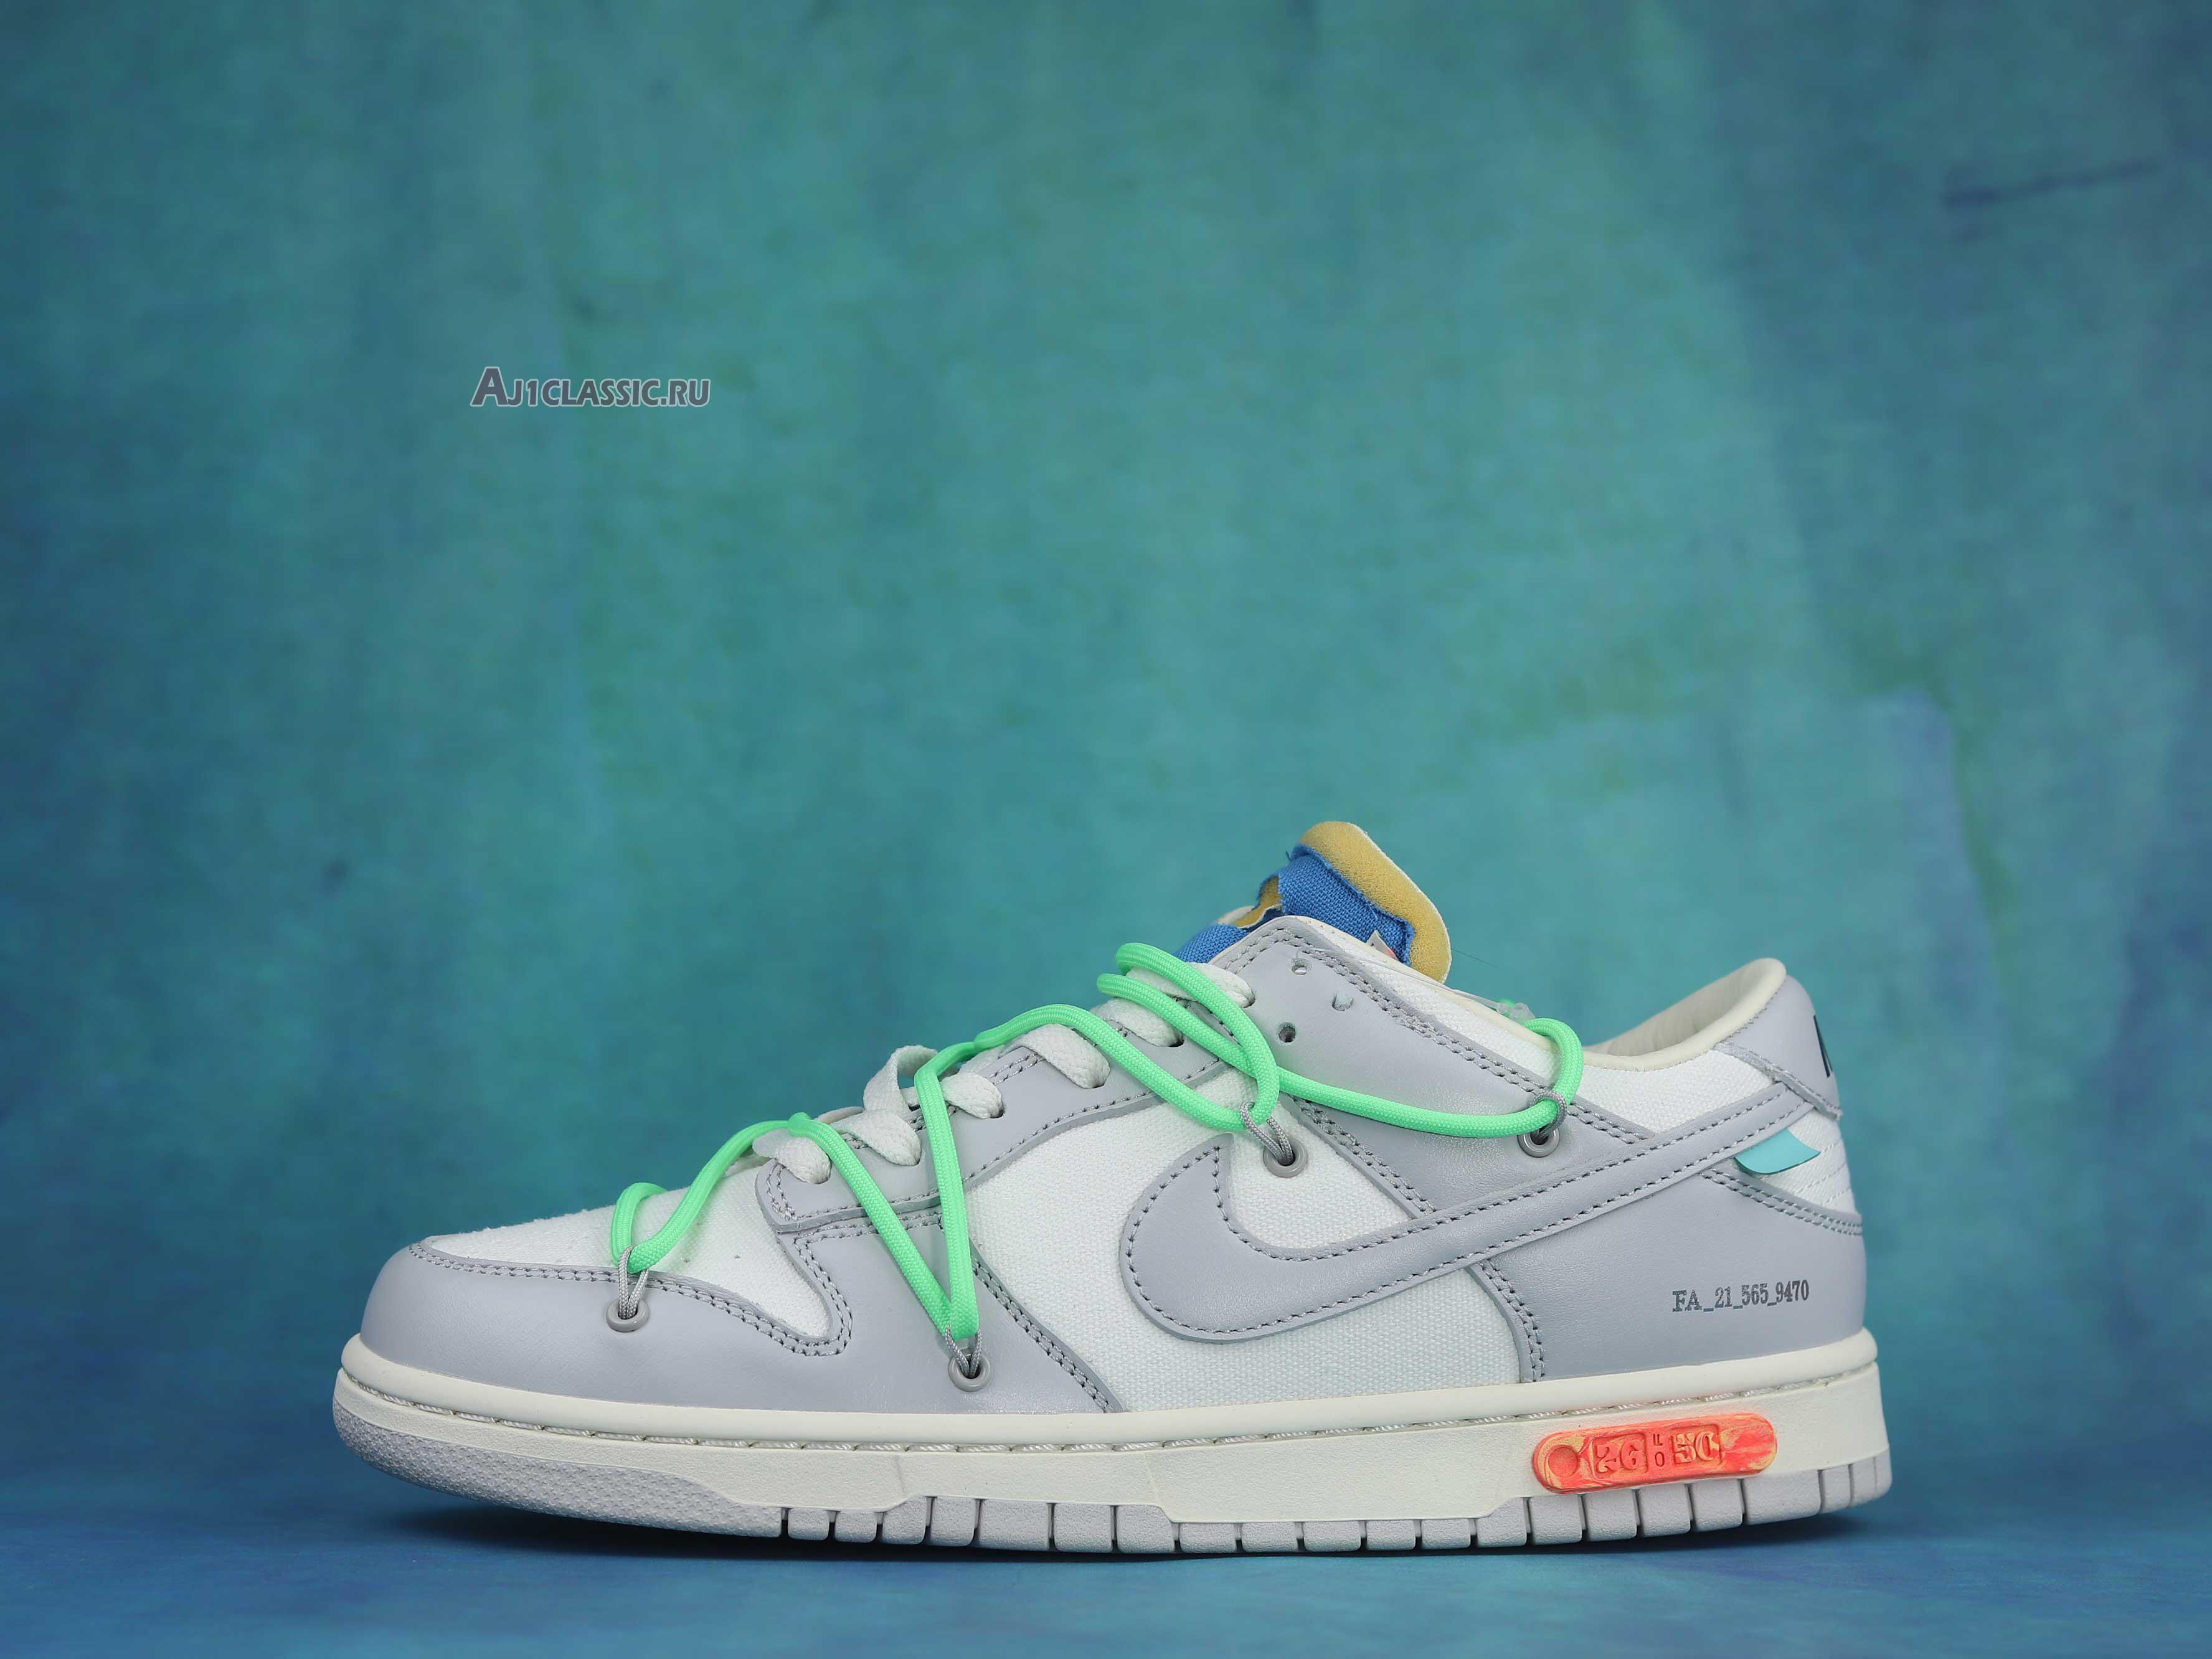 Off-White x Nike Dunk Low "Lot 26 of 50" DM1602-116